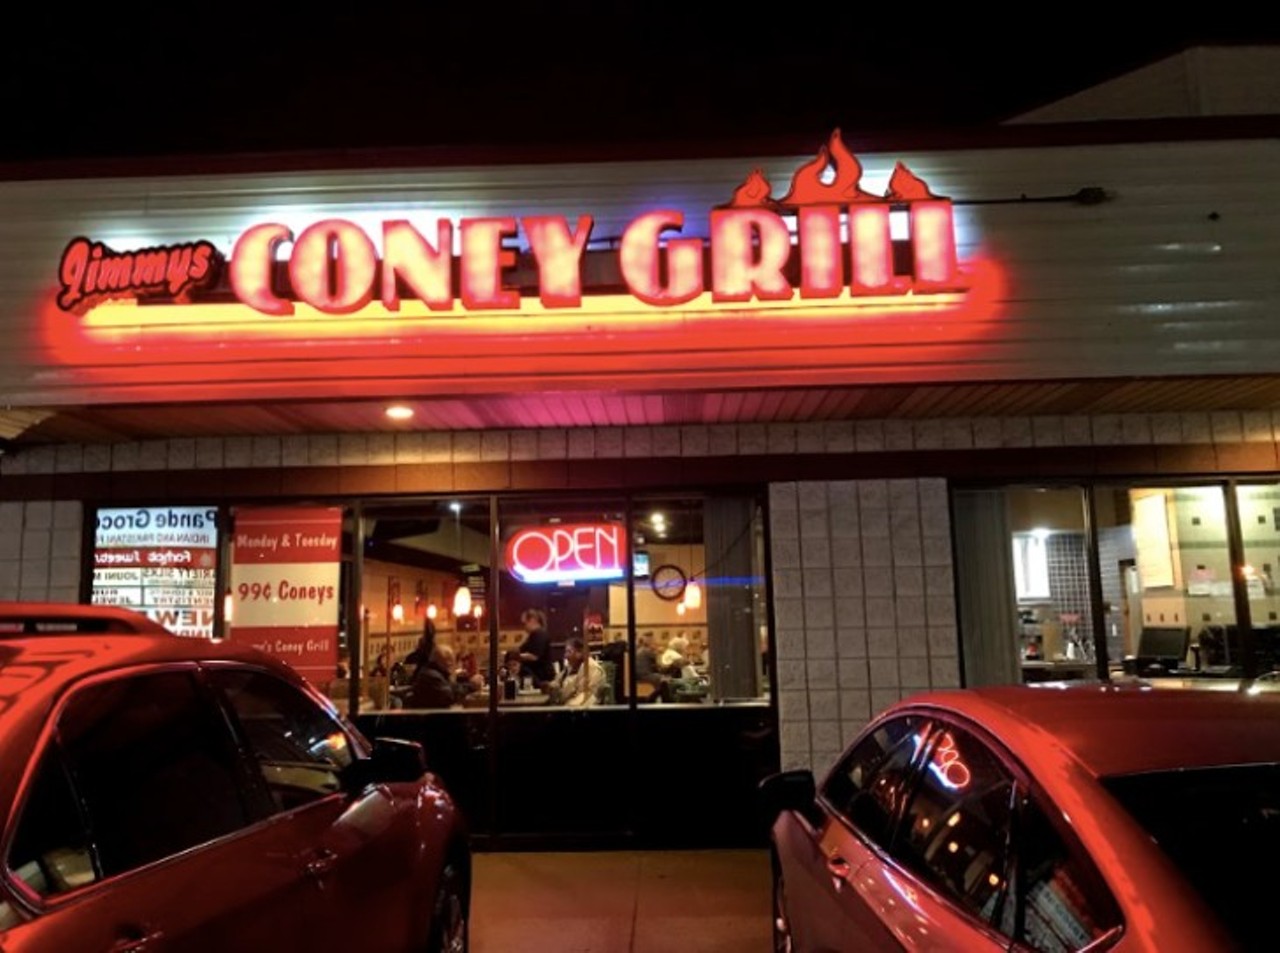 9. Jimmy&#146;s Coney Grill
37246 Dequindre Rd., Sterling Heights / 16651 E. 14 Mile Rd., Fraser
The best of the burbs. Jimmy&#146;s is one of the most underrated and off-the-radar coney restaurants if you&#146;re out in the suburbs of Sterling Heights or Fraser. But they are as friendly as they come and have an all-star menu to prop up their coney specials. The fish&#146;n&#146;chips are some of the best around as well.
Photo by Mike Dionne